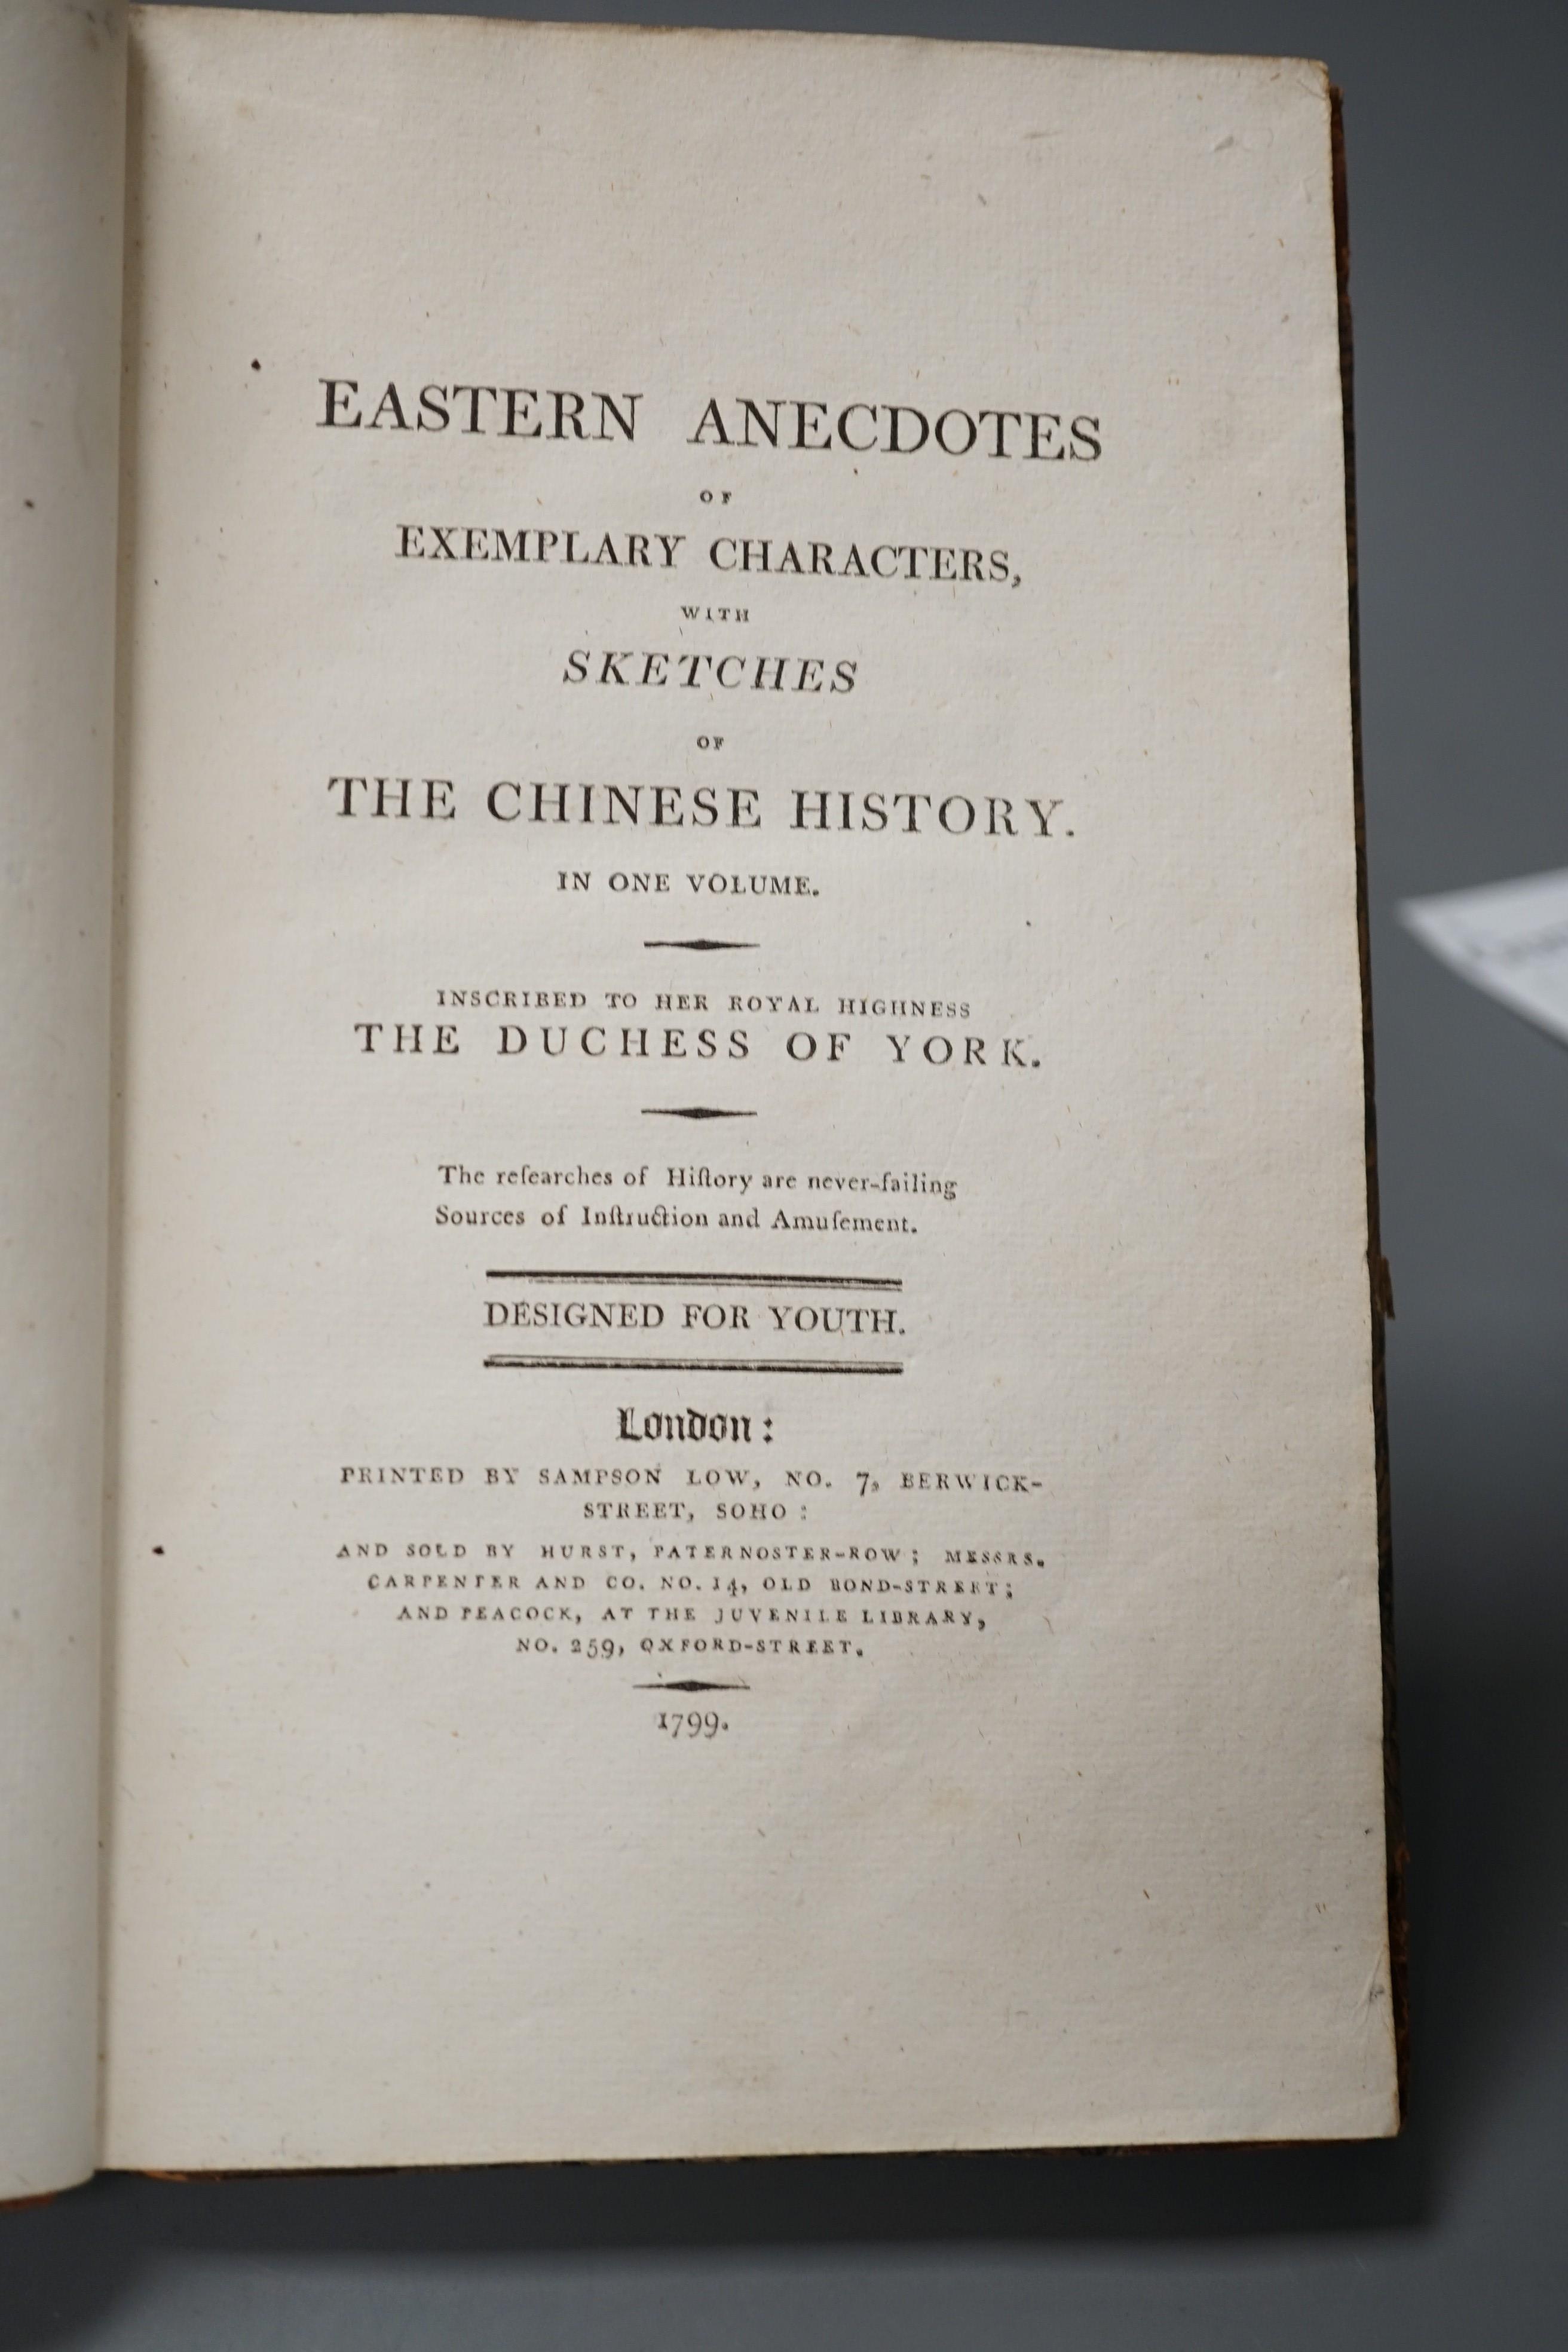 Anon - Eastern Anecdotes of Exemplary Characters, with Sketches of the Chinese History, 8vo, half calf, spine joints cracked, rubbed and with loss, Sampson Low, London, 1799 and Shaw, Bernard - Saint Joan, 2nd impression